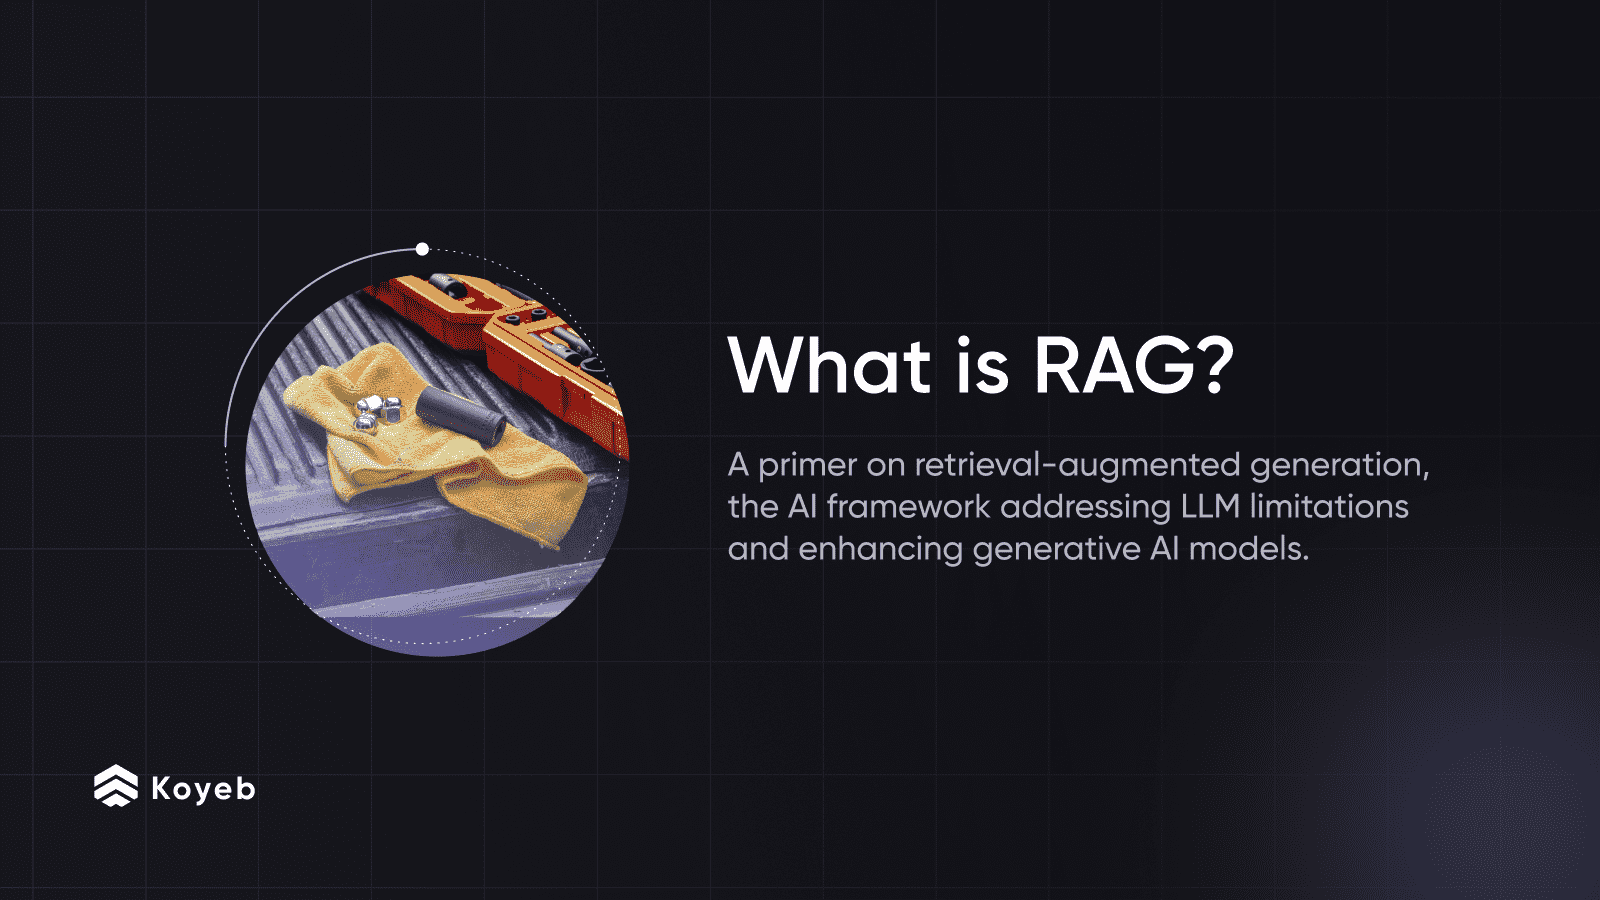 What is Retrieval Augmented Generation (RAG)? - Pureinsights